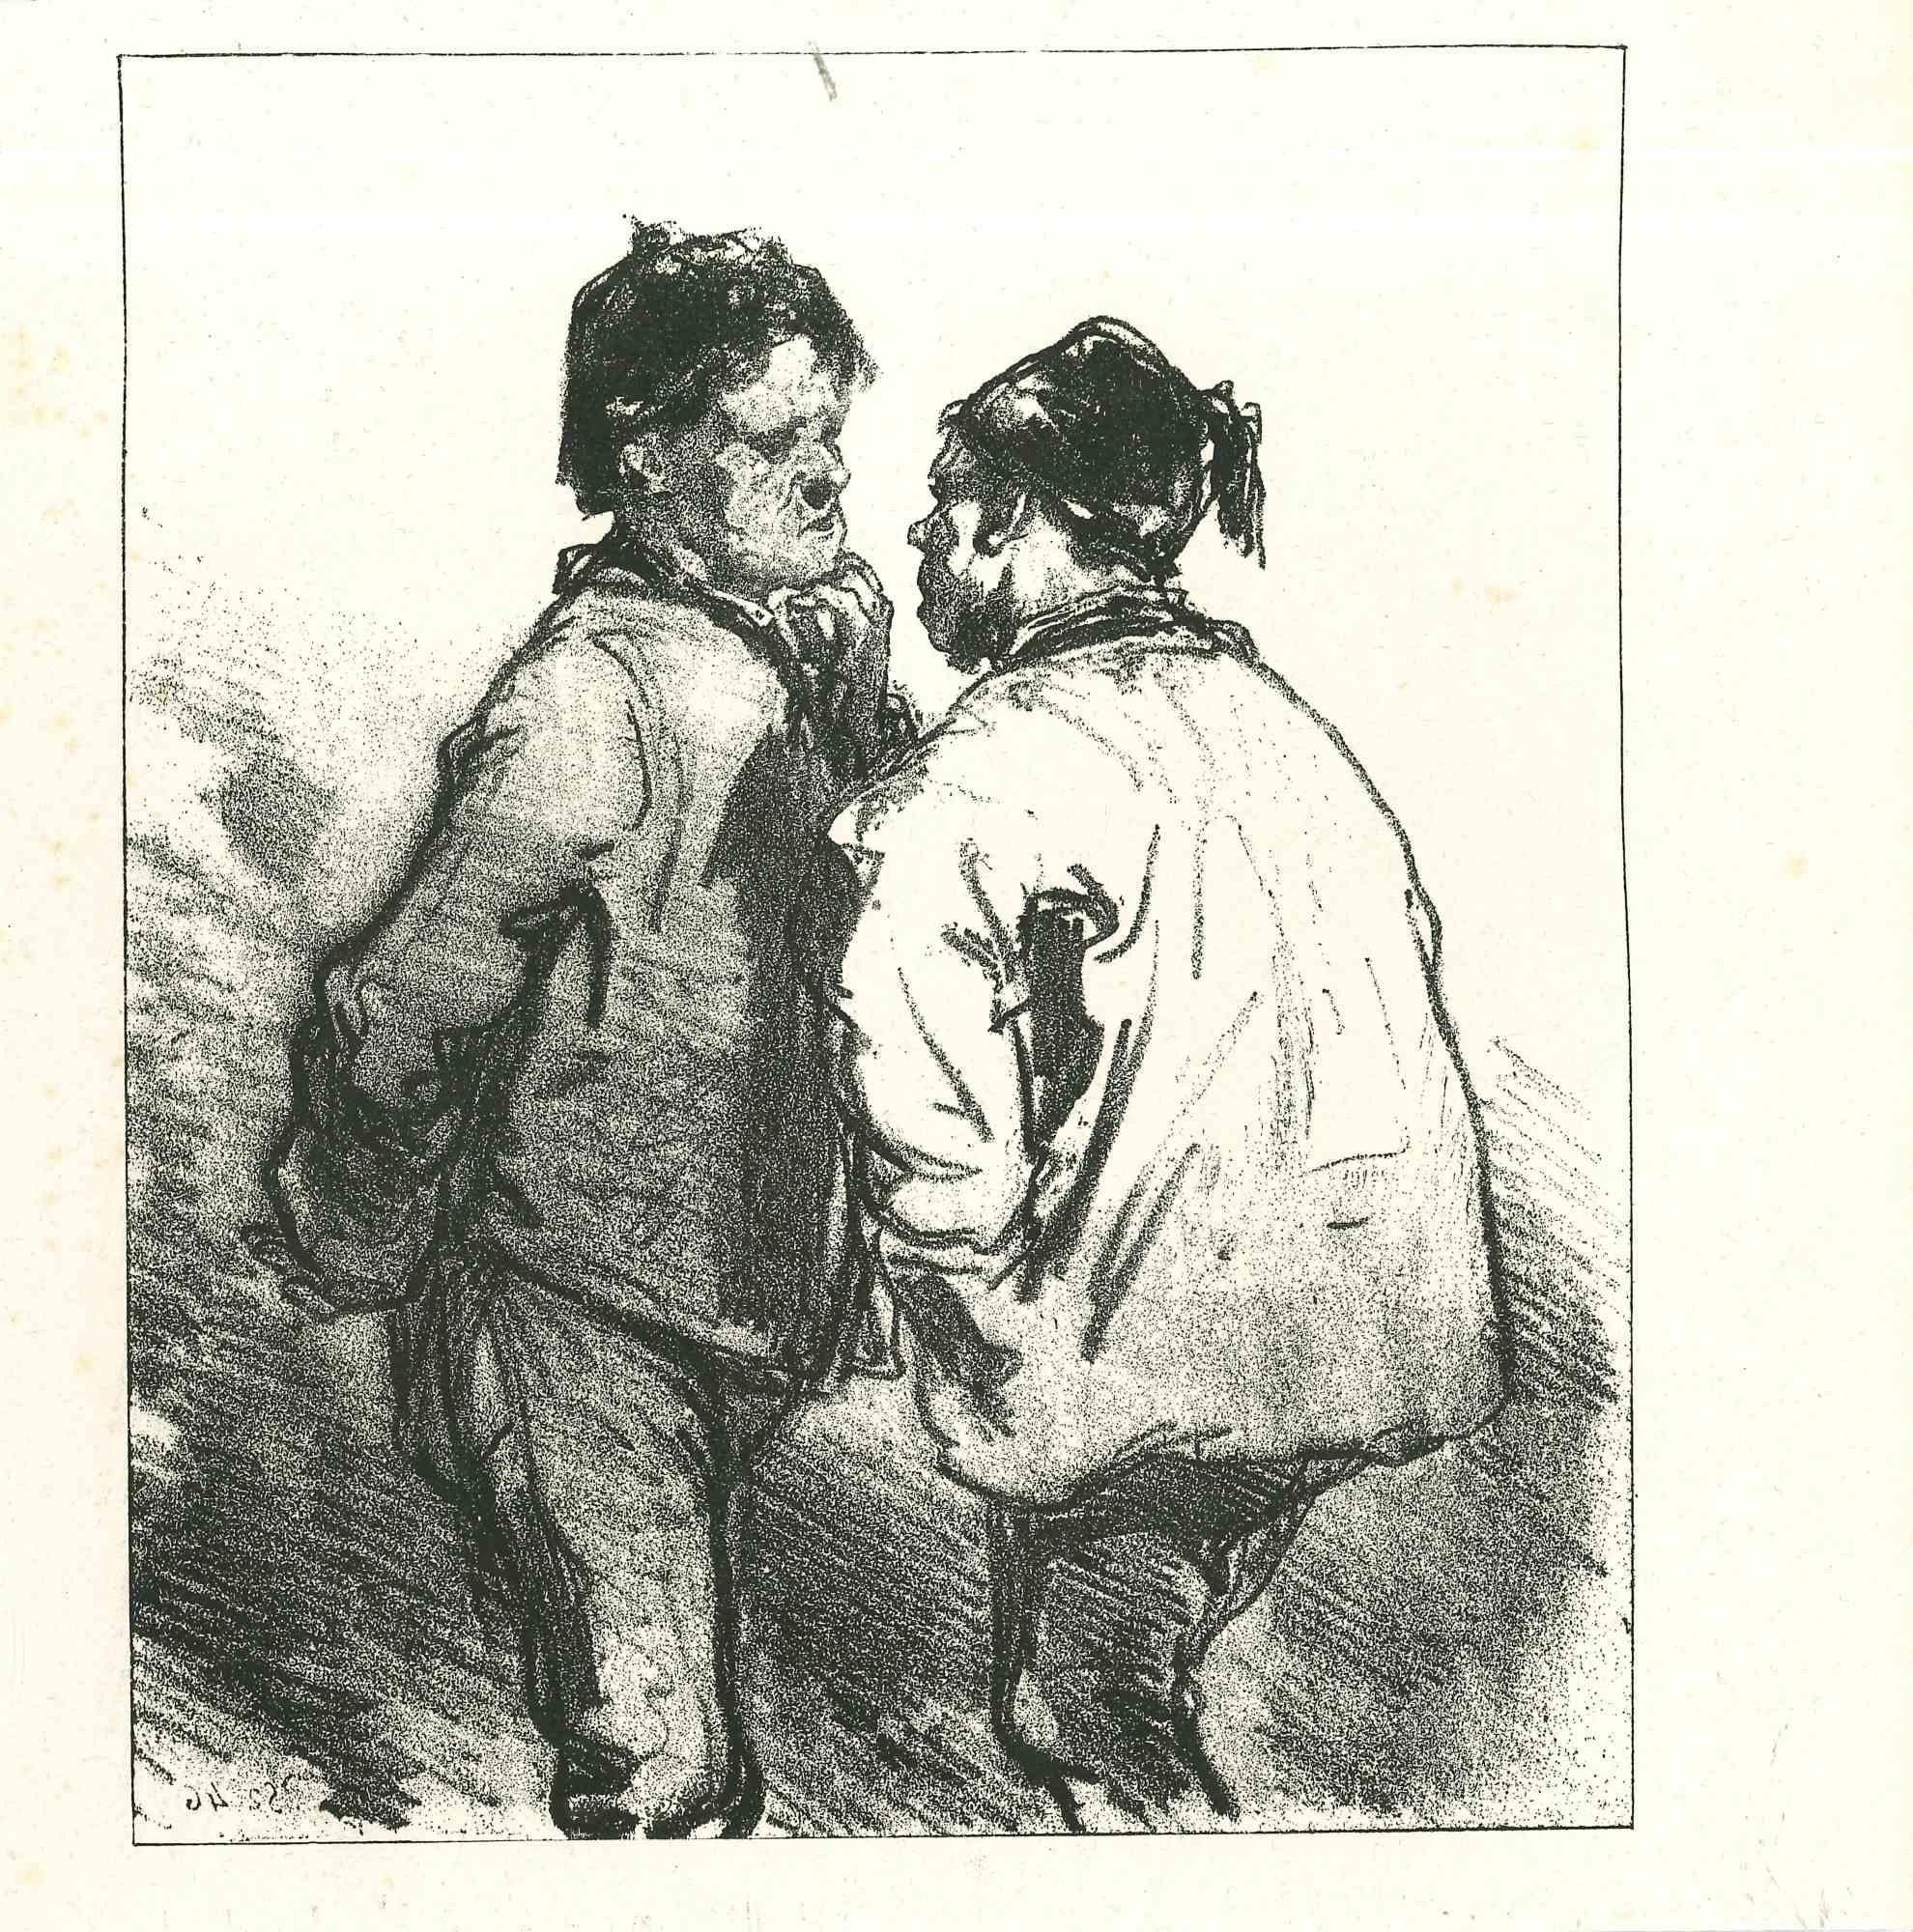 Two men is an original lithograph artwork on ivory-colored paper, realized by the French draftsman Paul Gavarni (after) (alias Guillaume Sulpice Chevalier Gavarni, 1804-1866) in Paris, 1881, in the collection of Illustrations for "La Mascarade